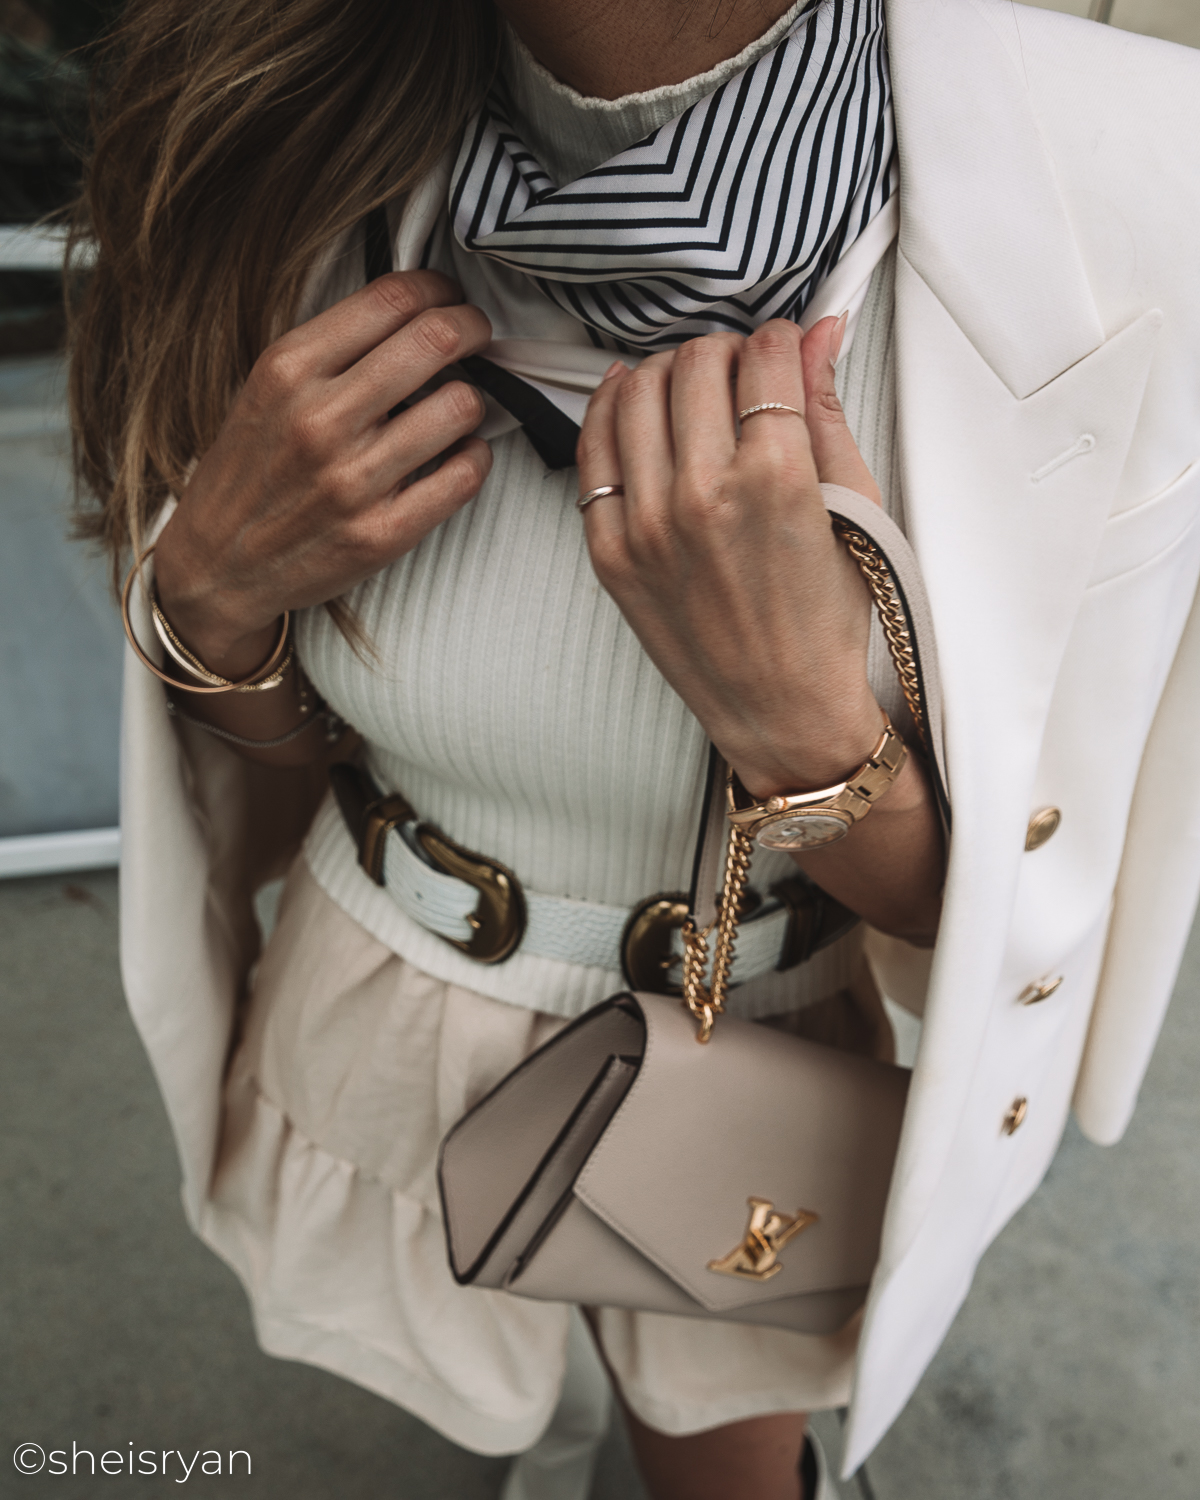 We Can't Get Enough of The New Scarf Bag Trend